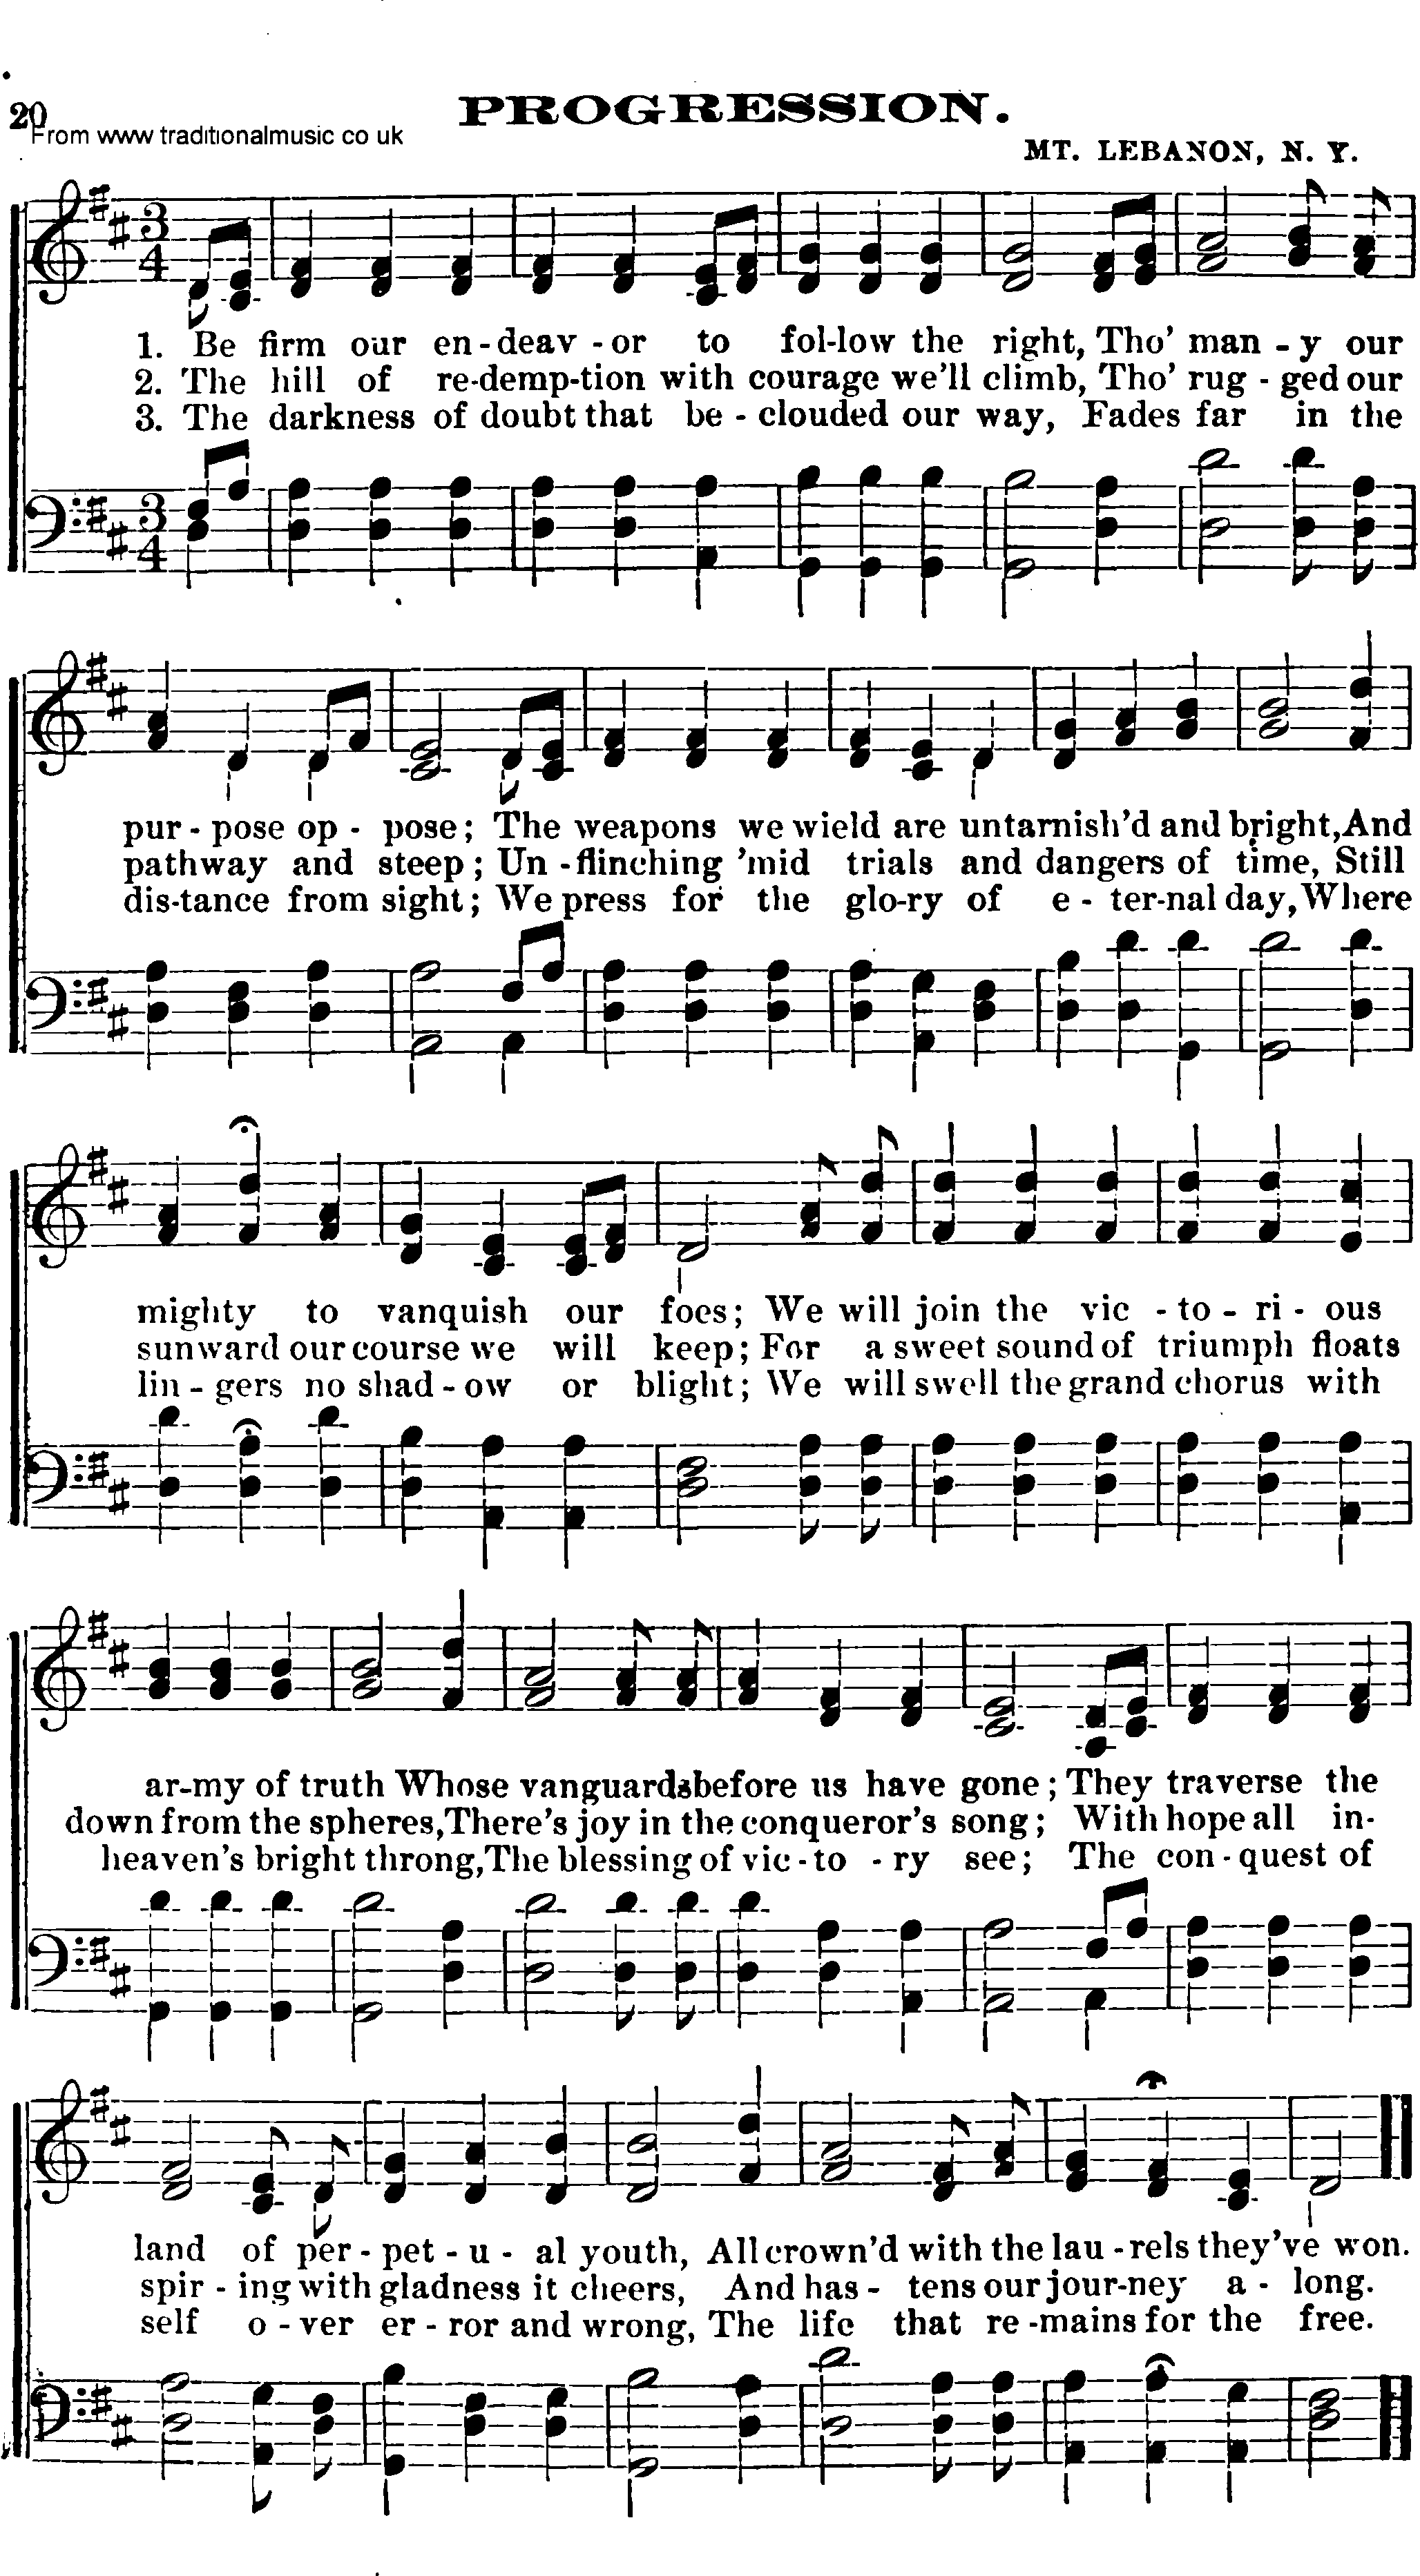 Shaker Music collection, Hymn: Progression, sheetmusic and PDF